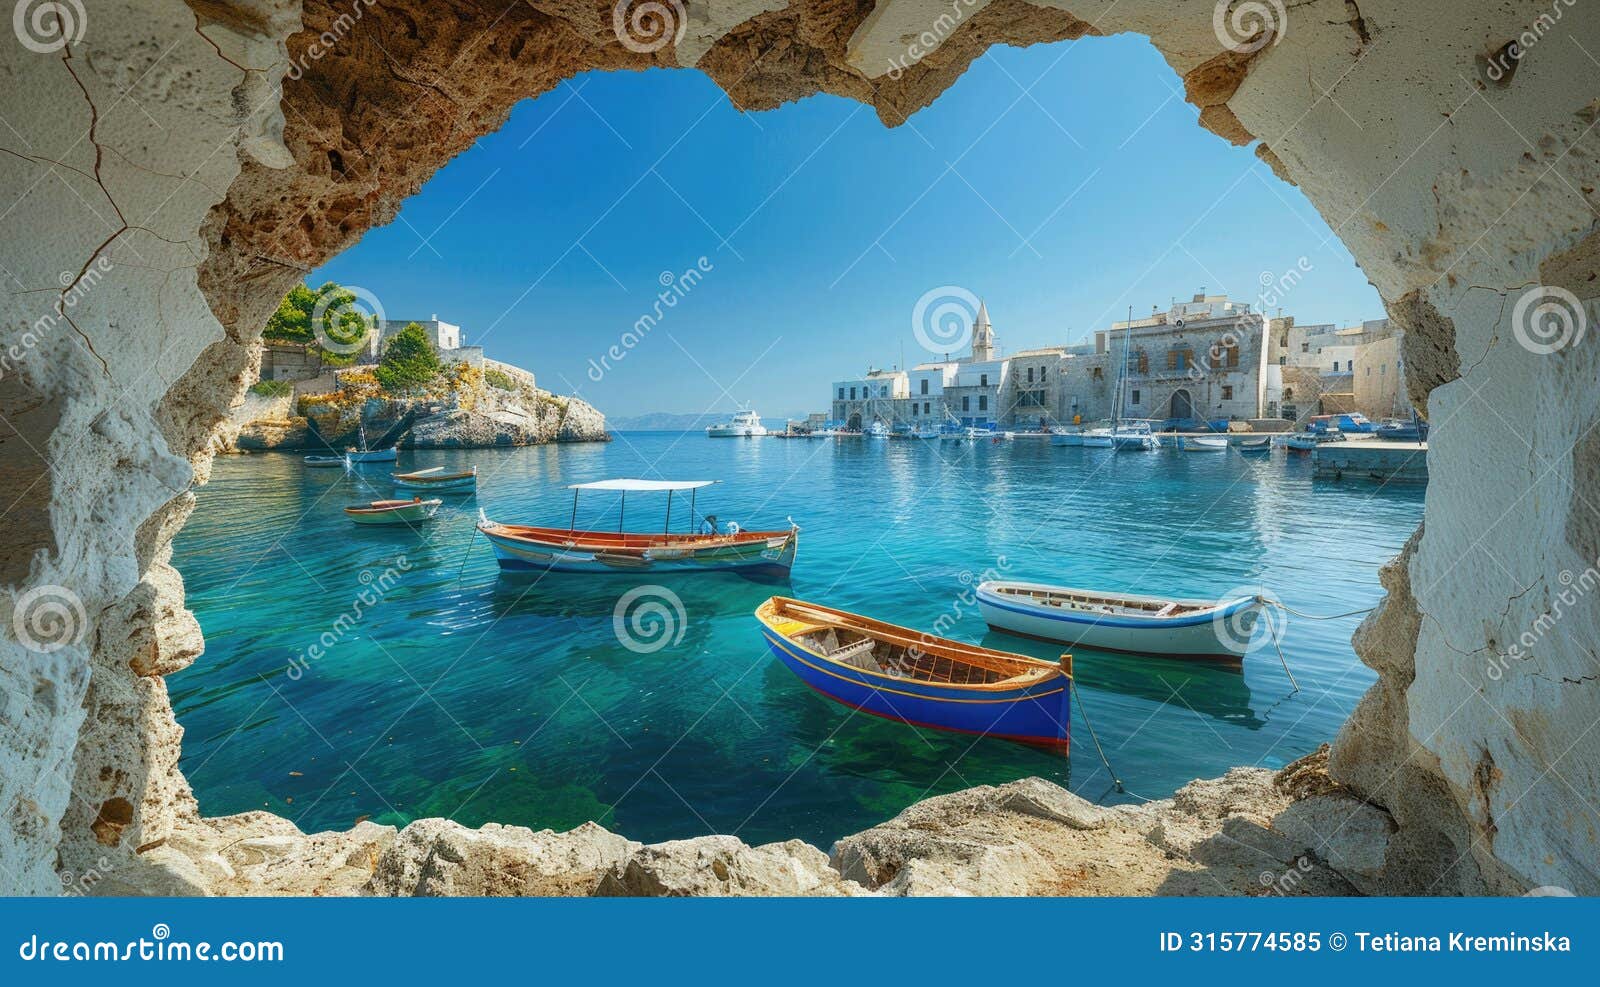 historical harbor view through a deep blue hole in a stark white wall